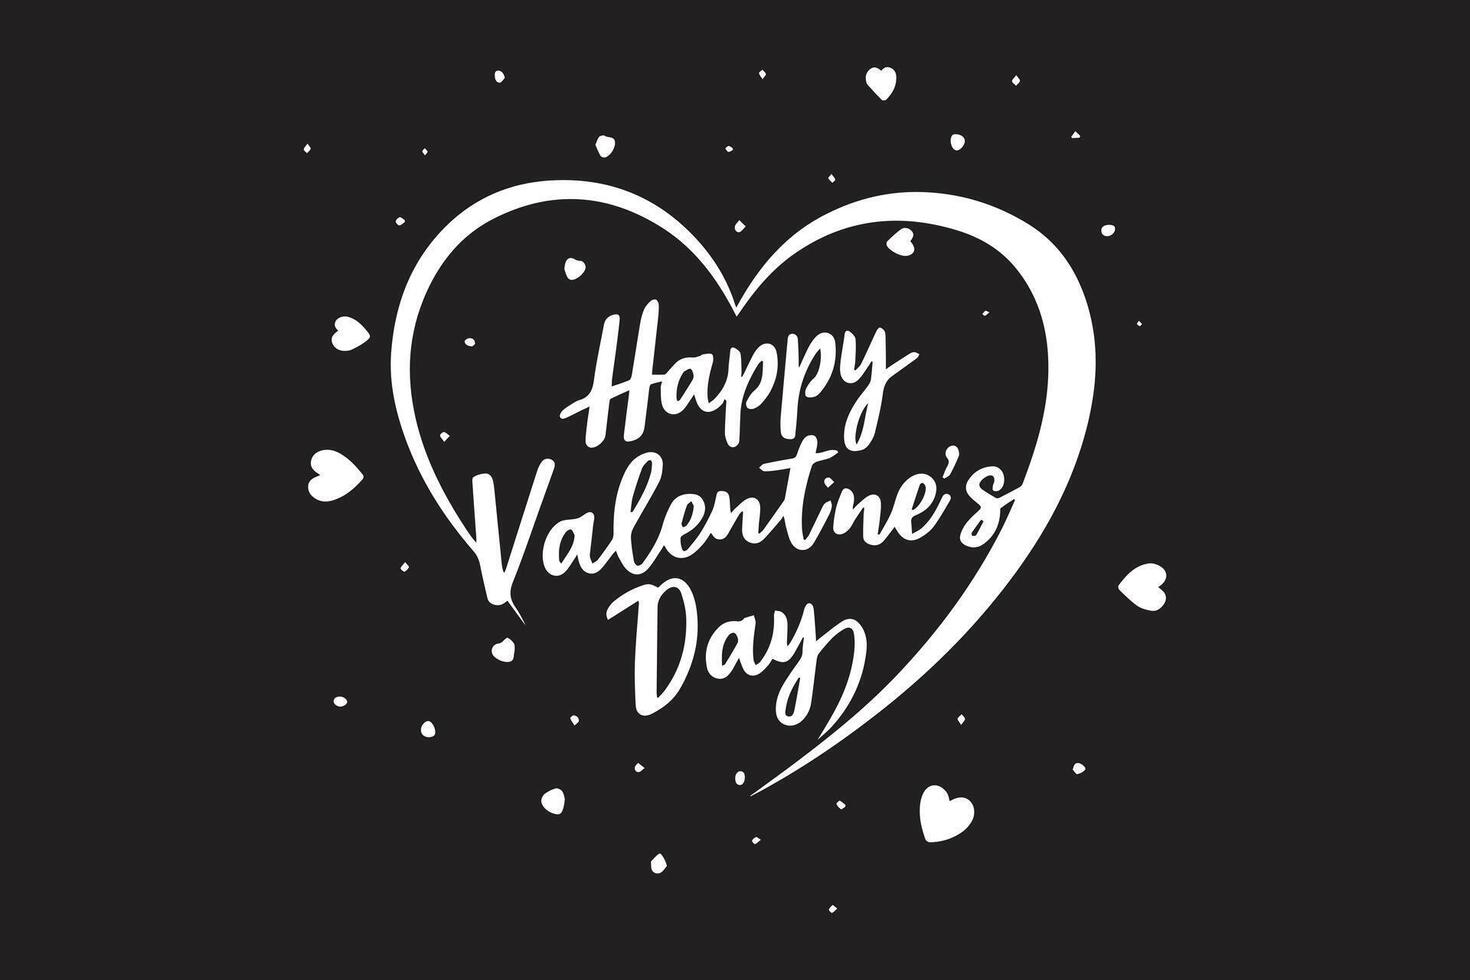 Happy Valentines Day text card on a black background vector